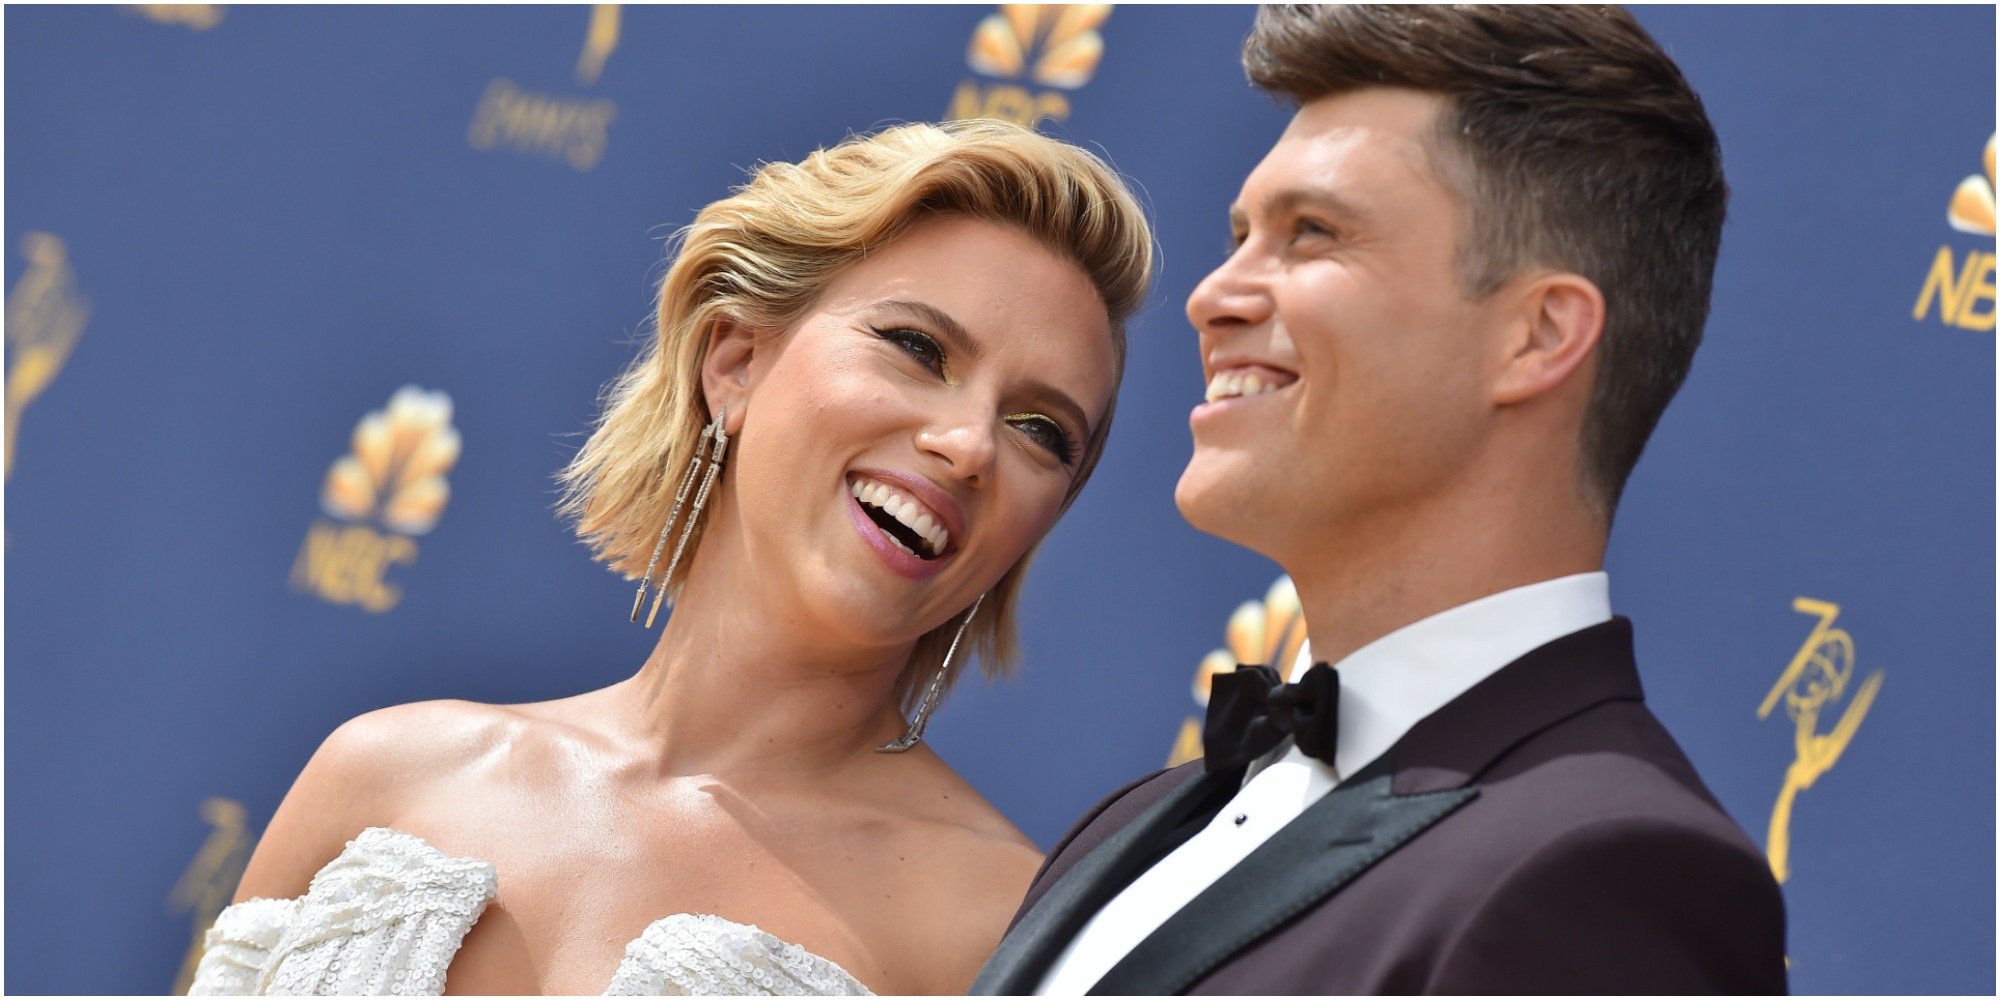 Colin Jost and Scarlett Johannsson pose on the red carpet for the 70th Emmy Awards at Microsoft Theater on September 17, 2018.